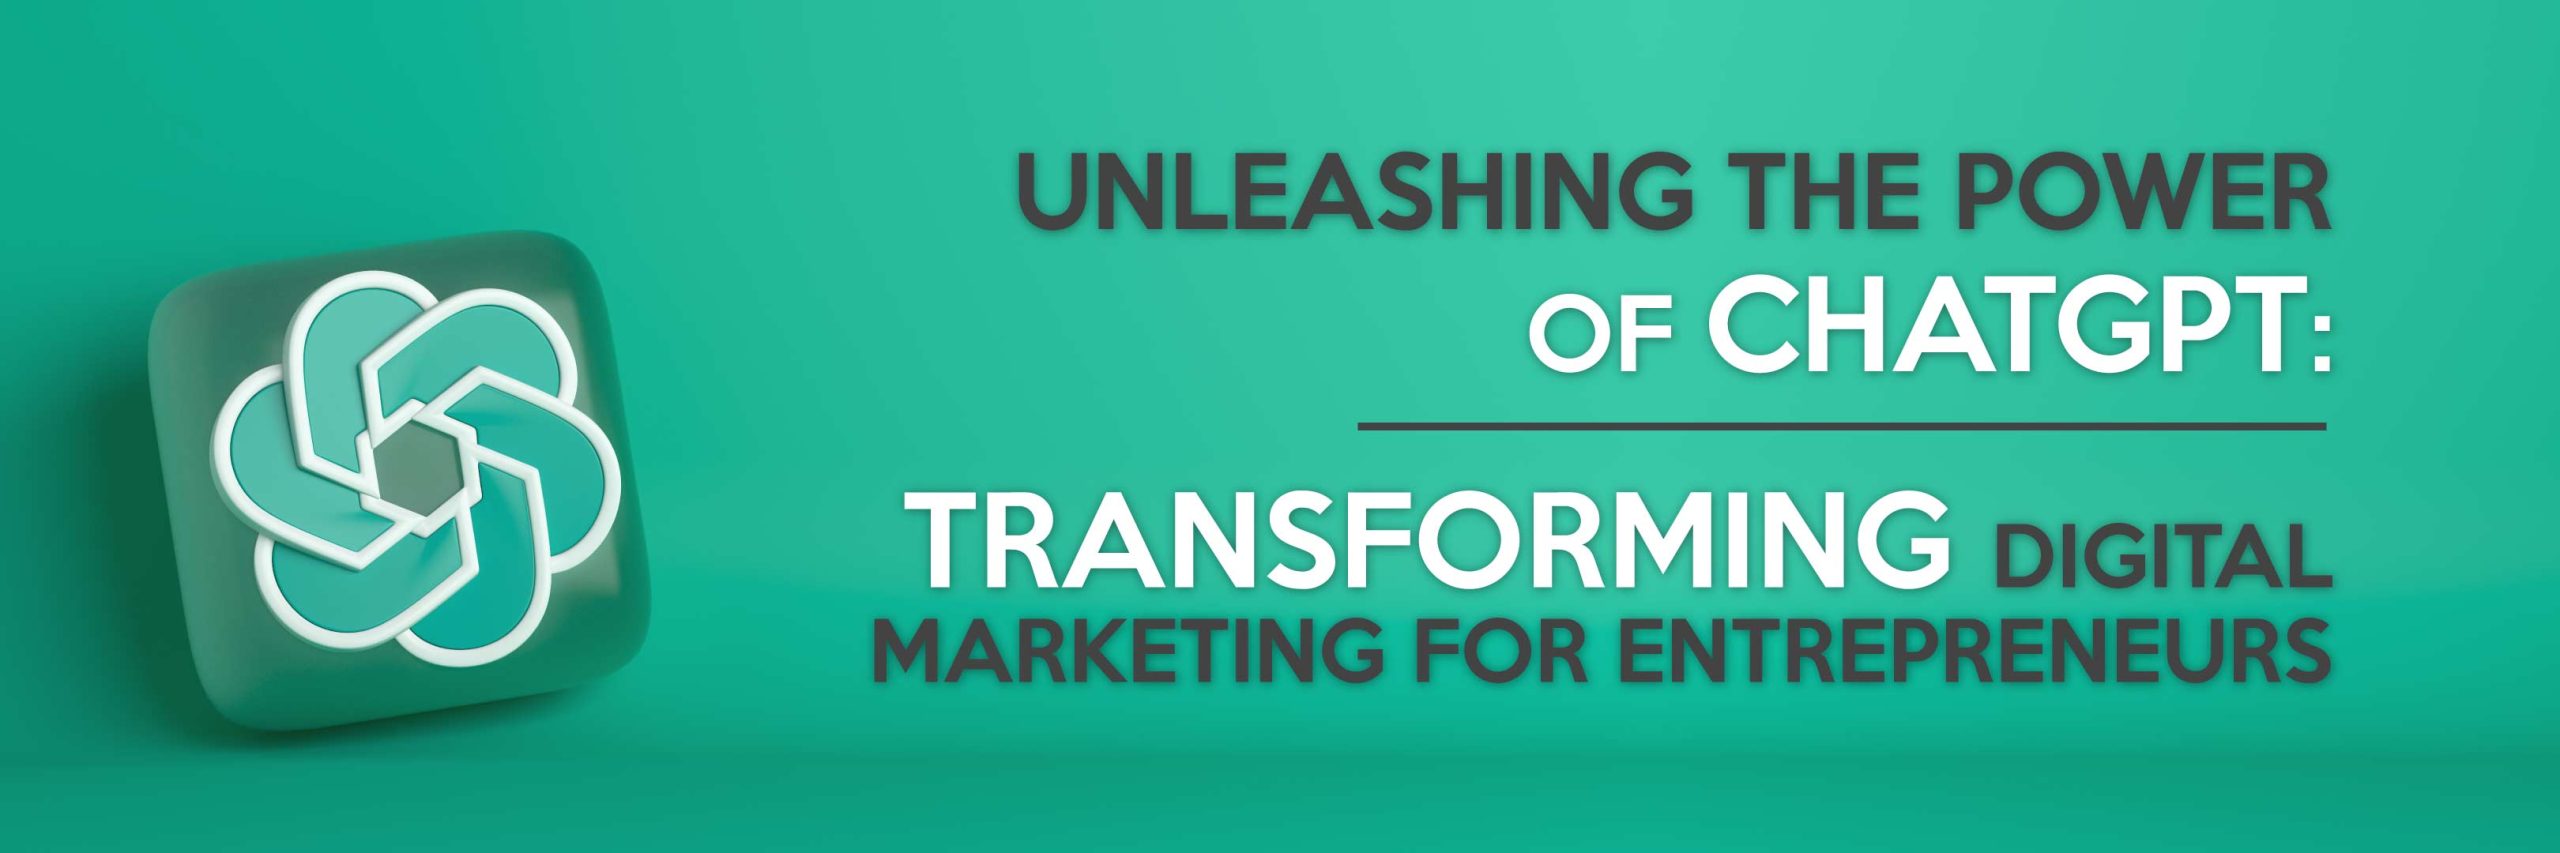 Unleashing the Power of ChatGPT Transforming Digital Marketing for Entrepreneurs scaled